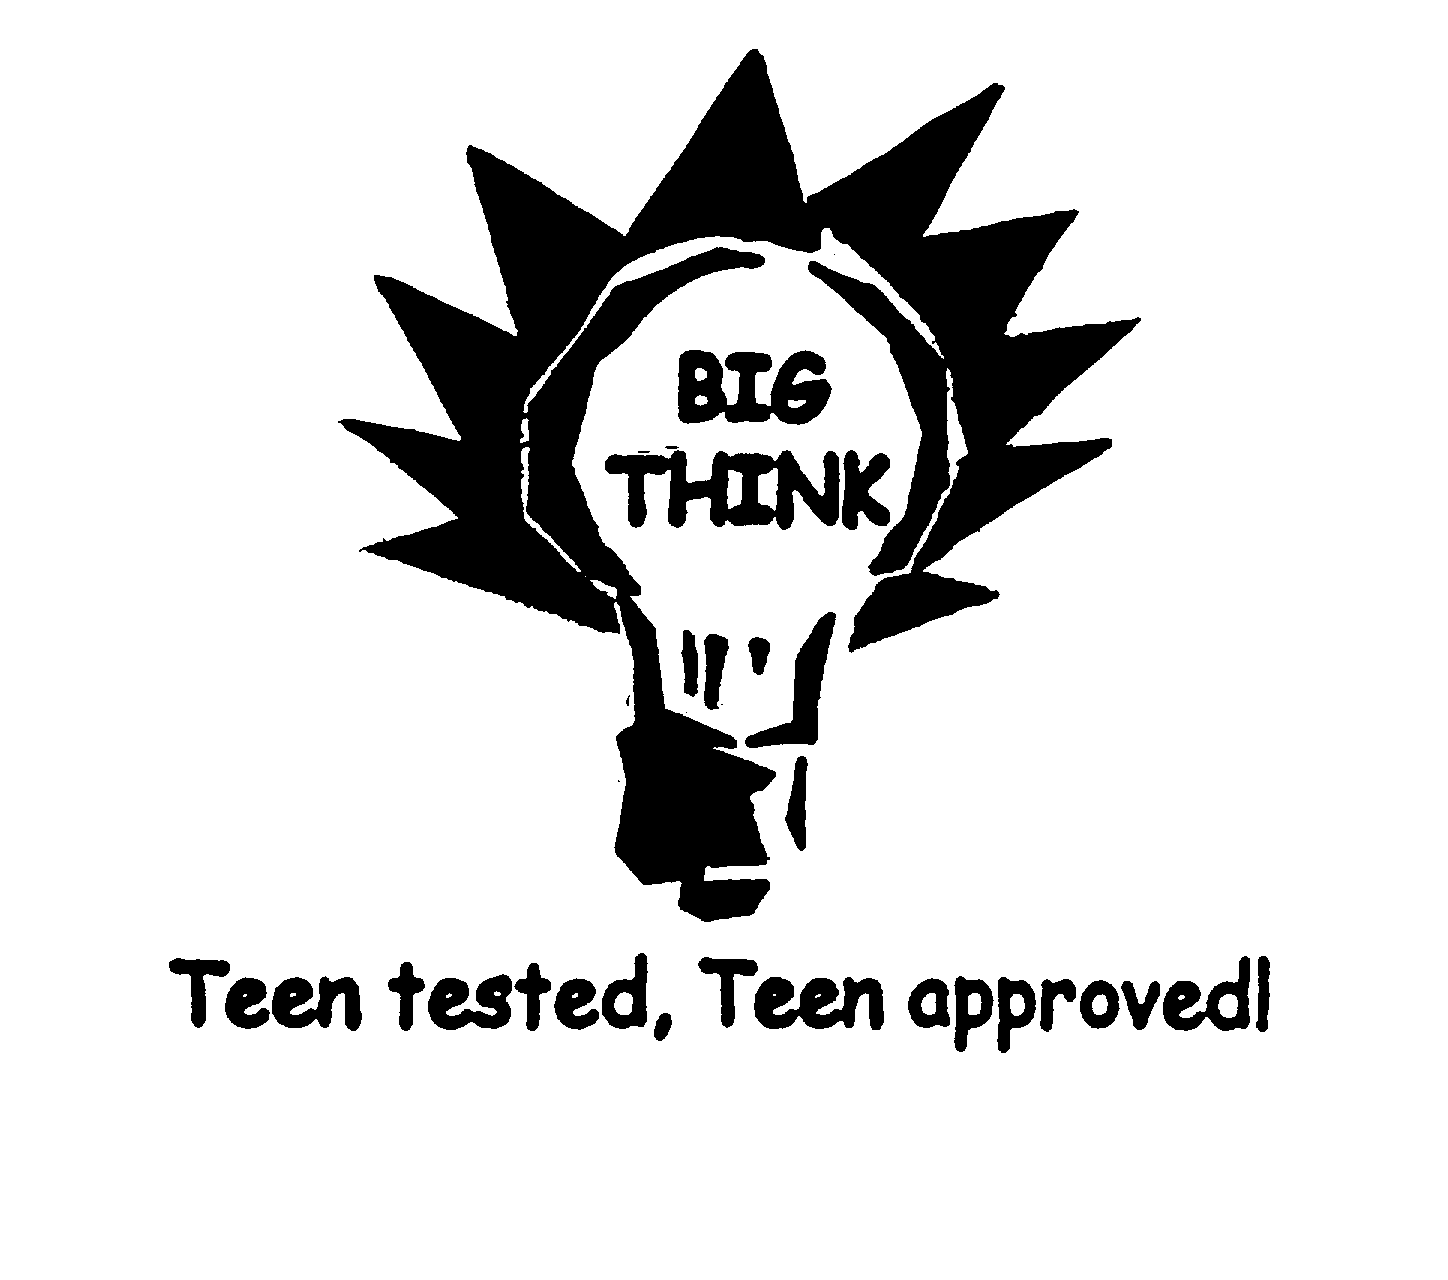  TEEN TESTED, TEEN APPROVED BIG THINK